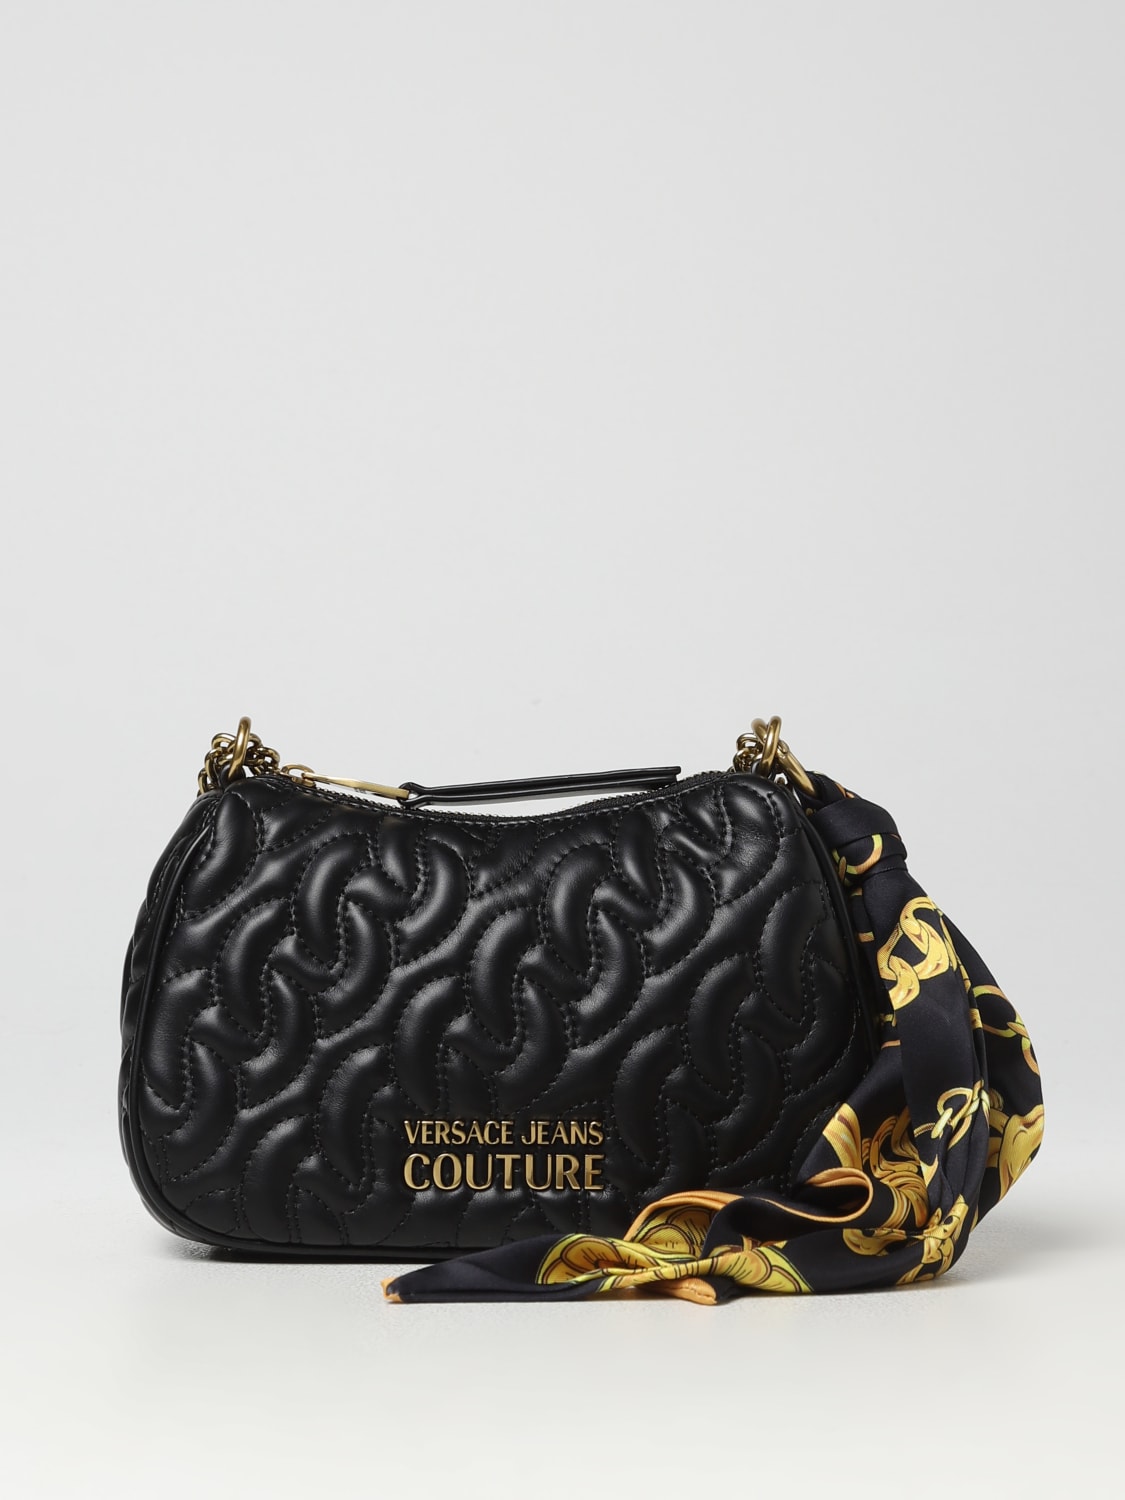 Versace Jeans Couture women's bag in imitation leather with logo lettering  Black